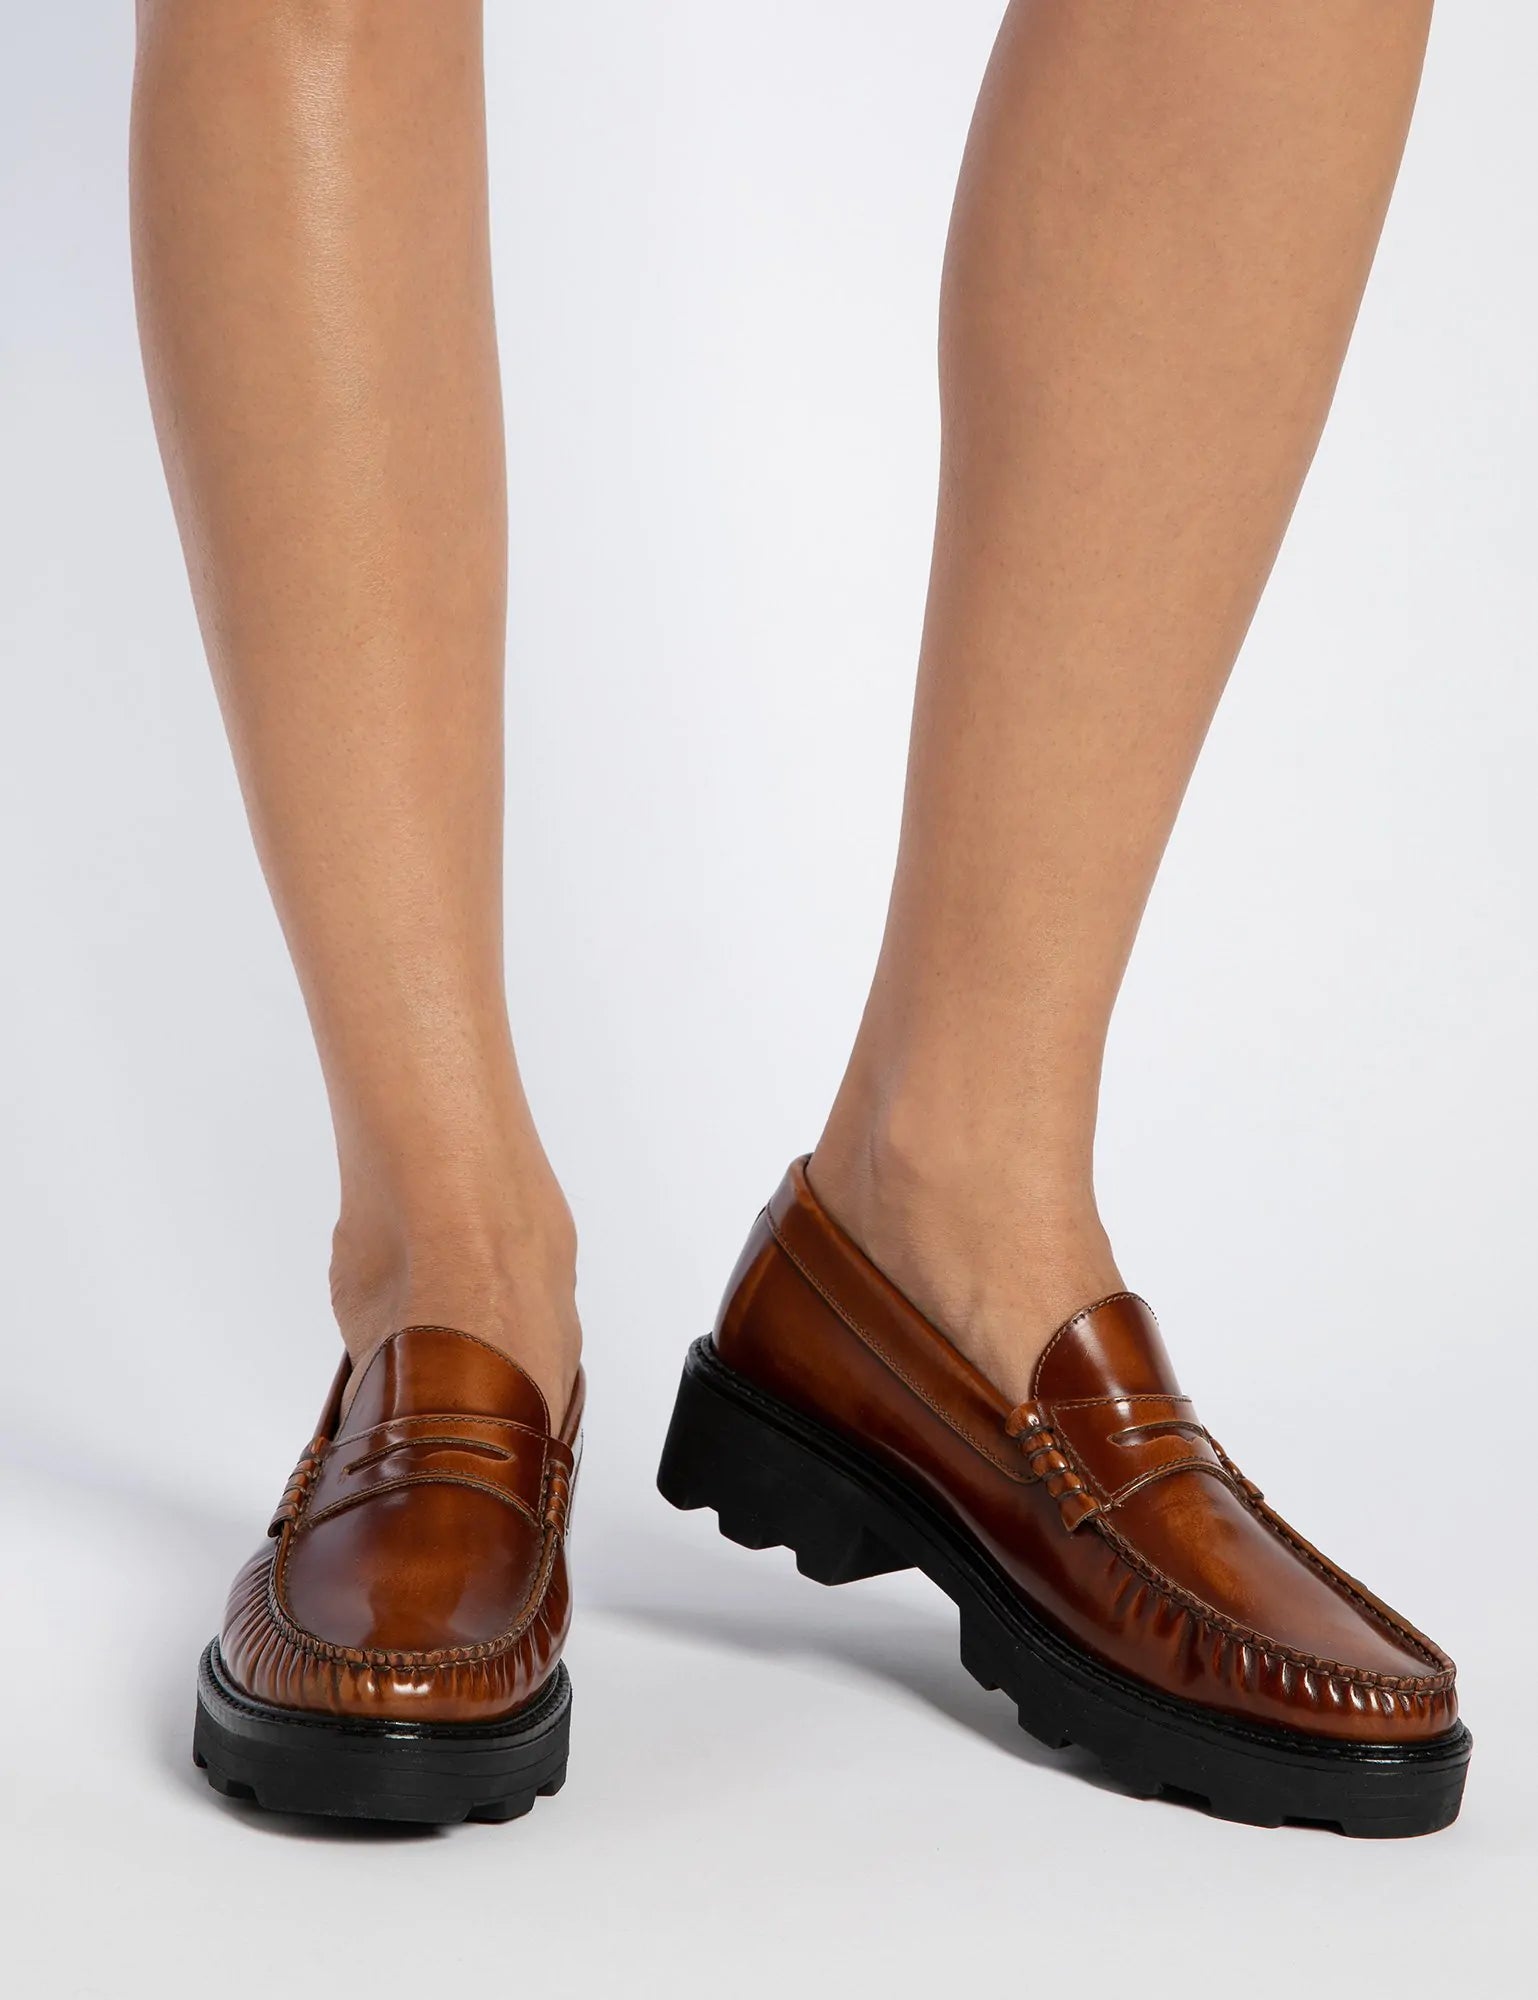 Penelope Chilvers Idler Forentic Brown Loafer